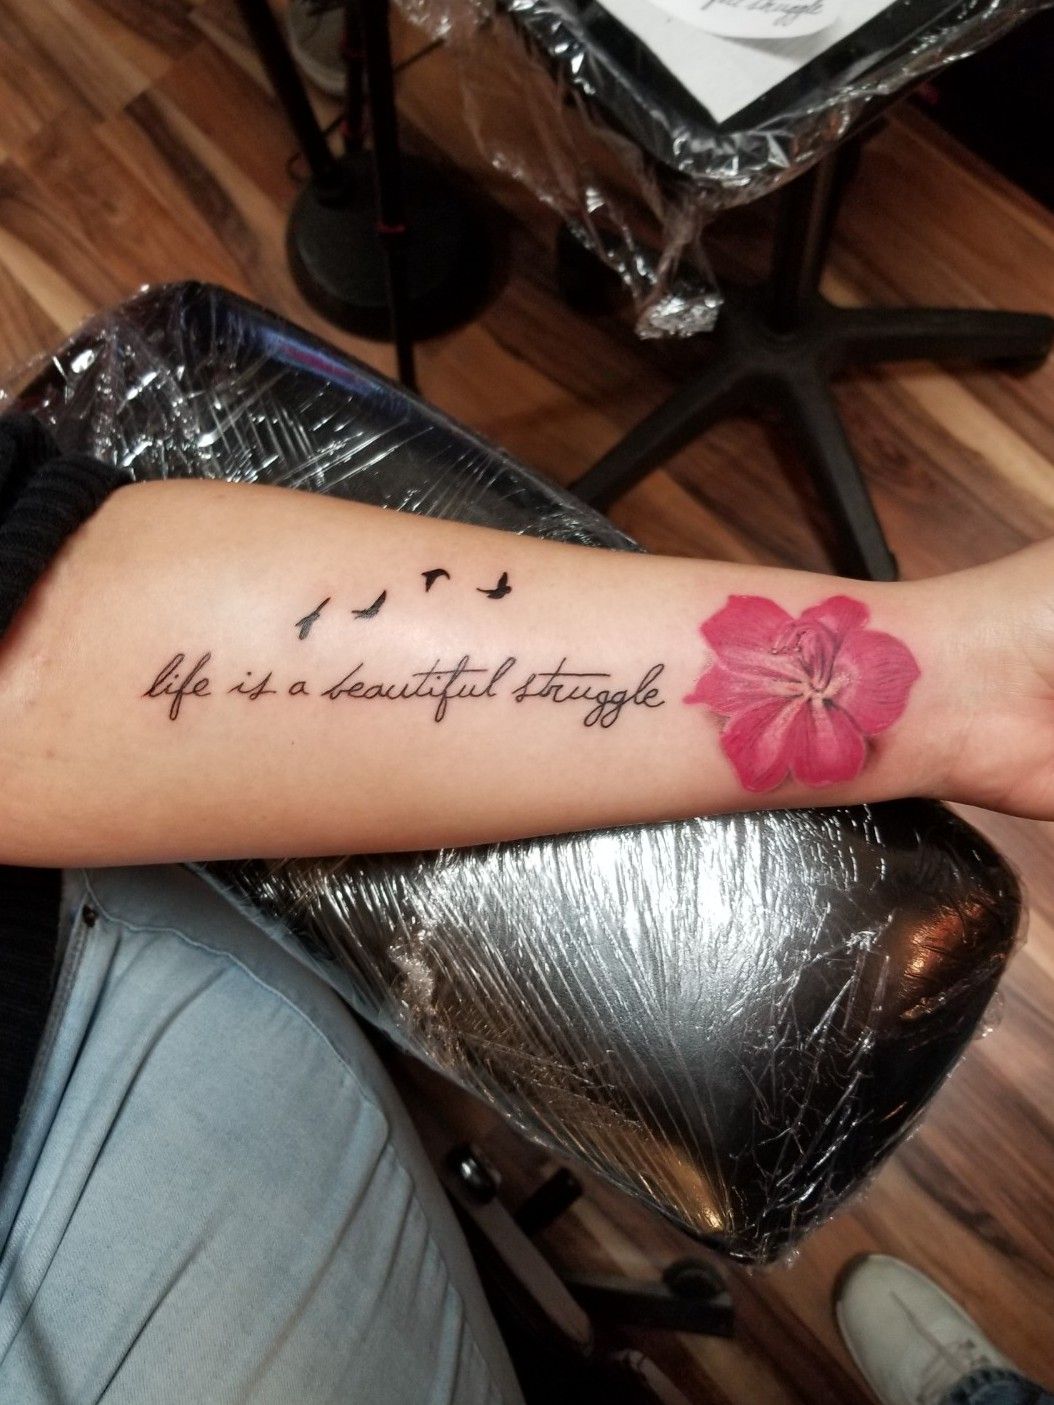 Getting Through Struggles Quotes About Tattoos QuotesGram